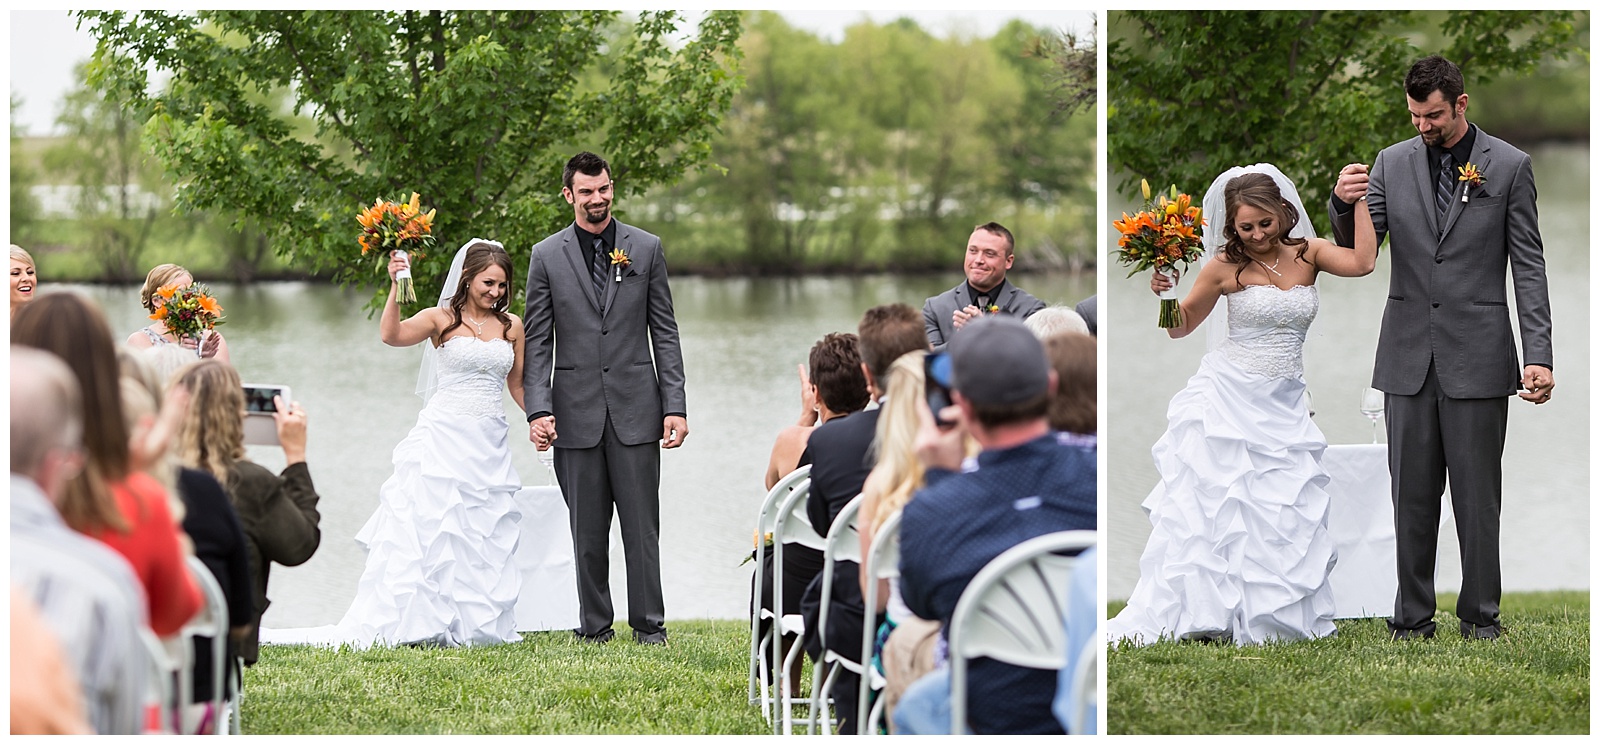 Wedding photography at Arcadian Moon Vineyards and Winery in Higginsville, Missouri.